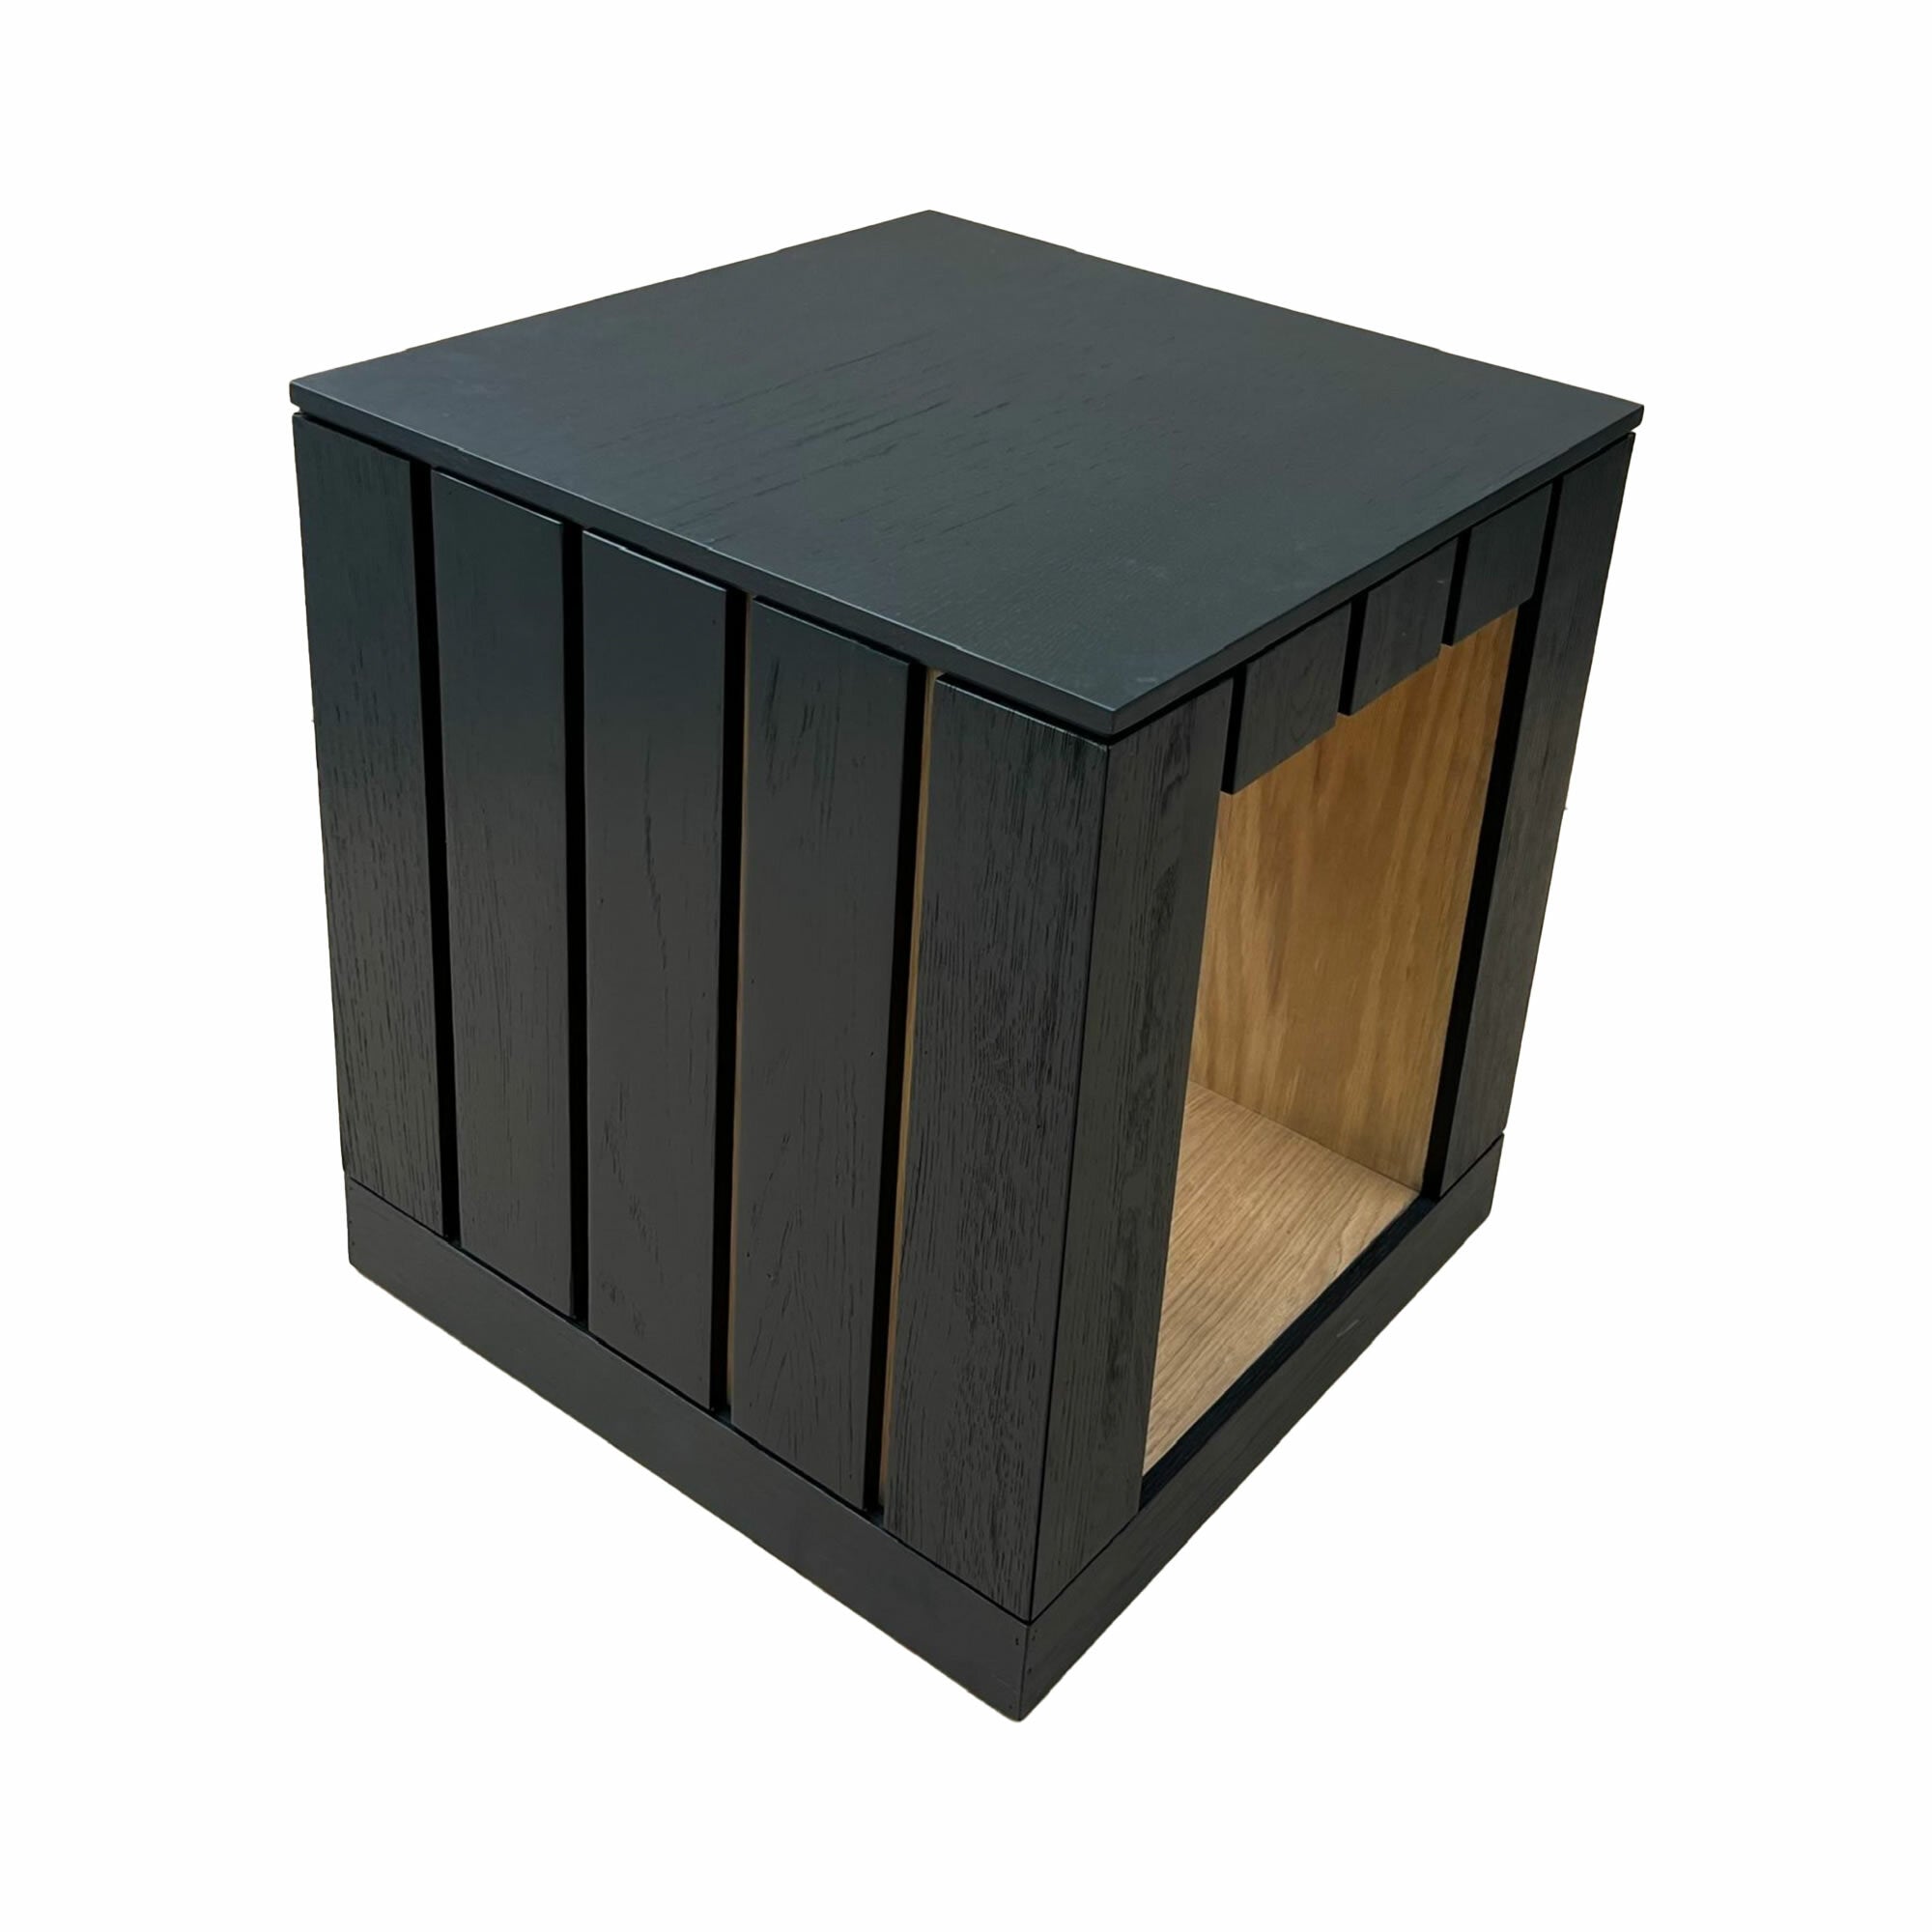 Piha Side Table - Black Stained Oak Exterior with Natural Oak Interior